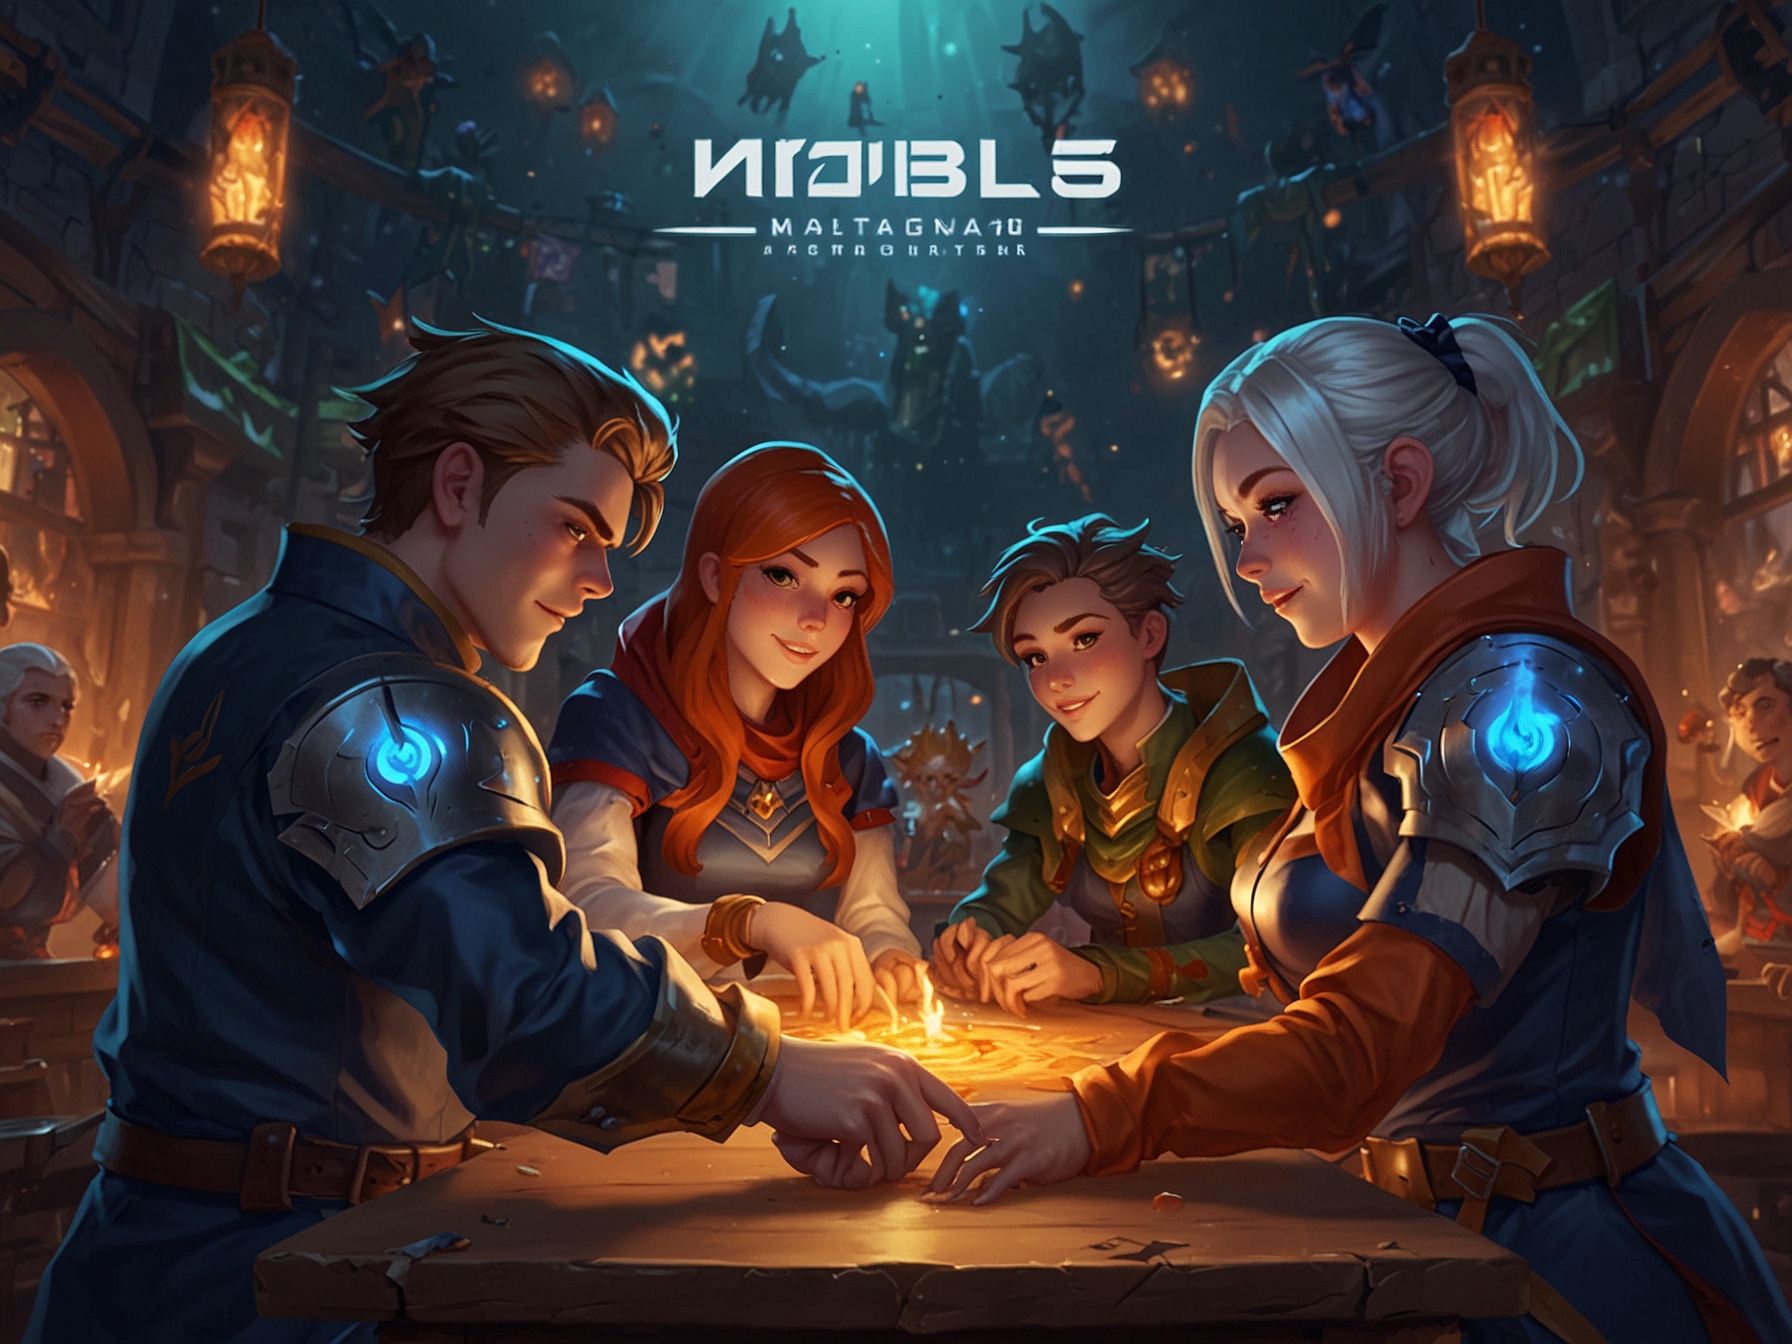 New players engaged in a tutorial mode of the mobile MOBA game, highlighting its user-friendly onboarding process and beginner-friendly features that ease newcomers into the gameplay.